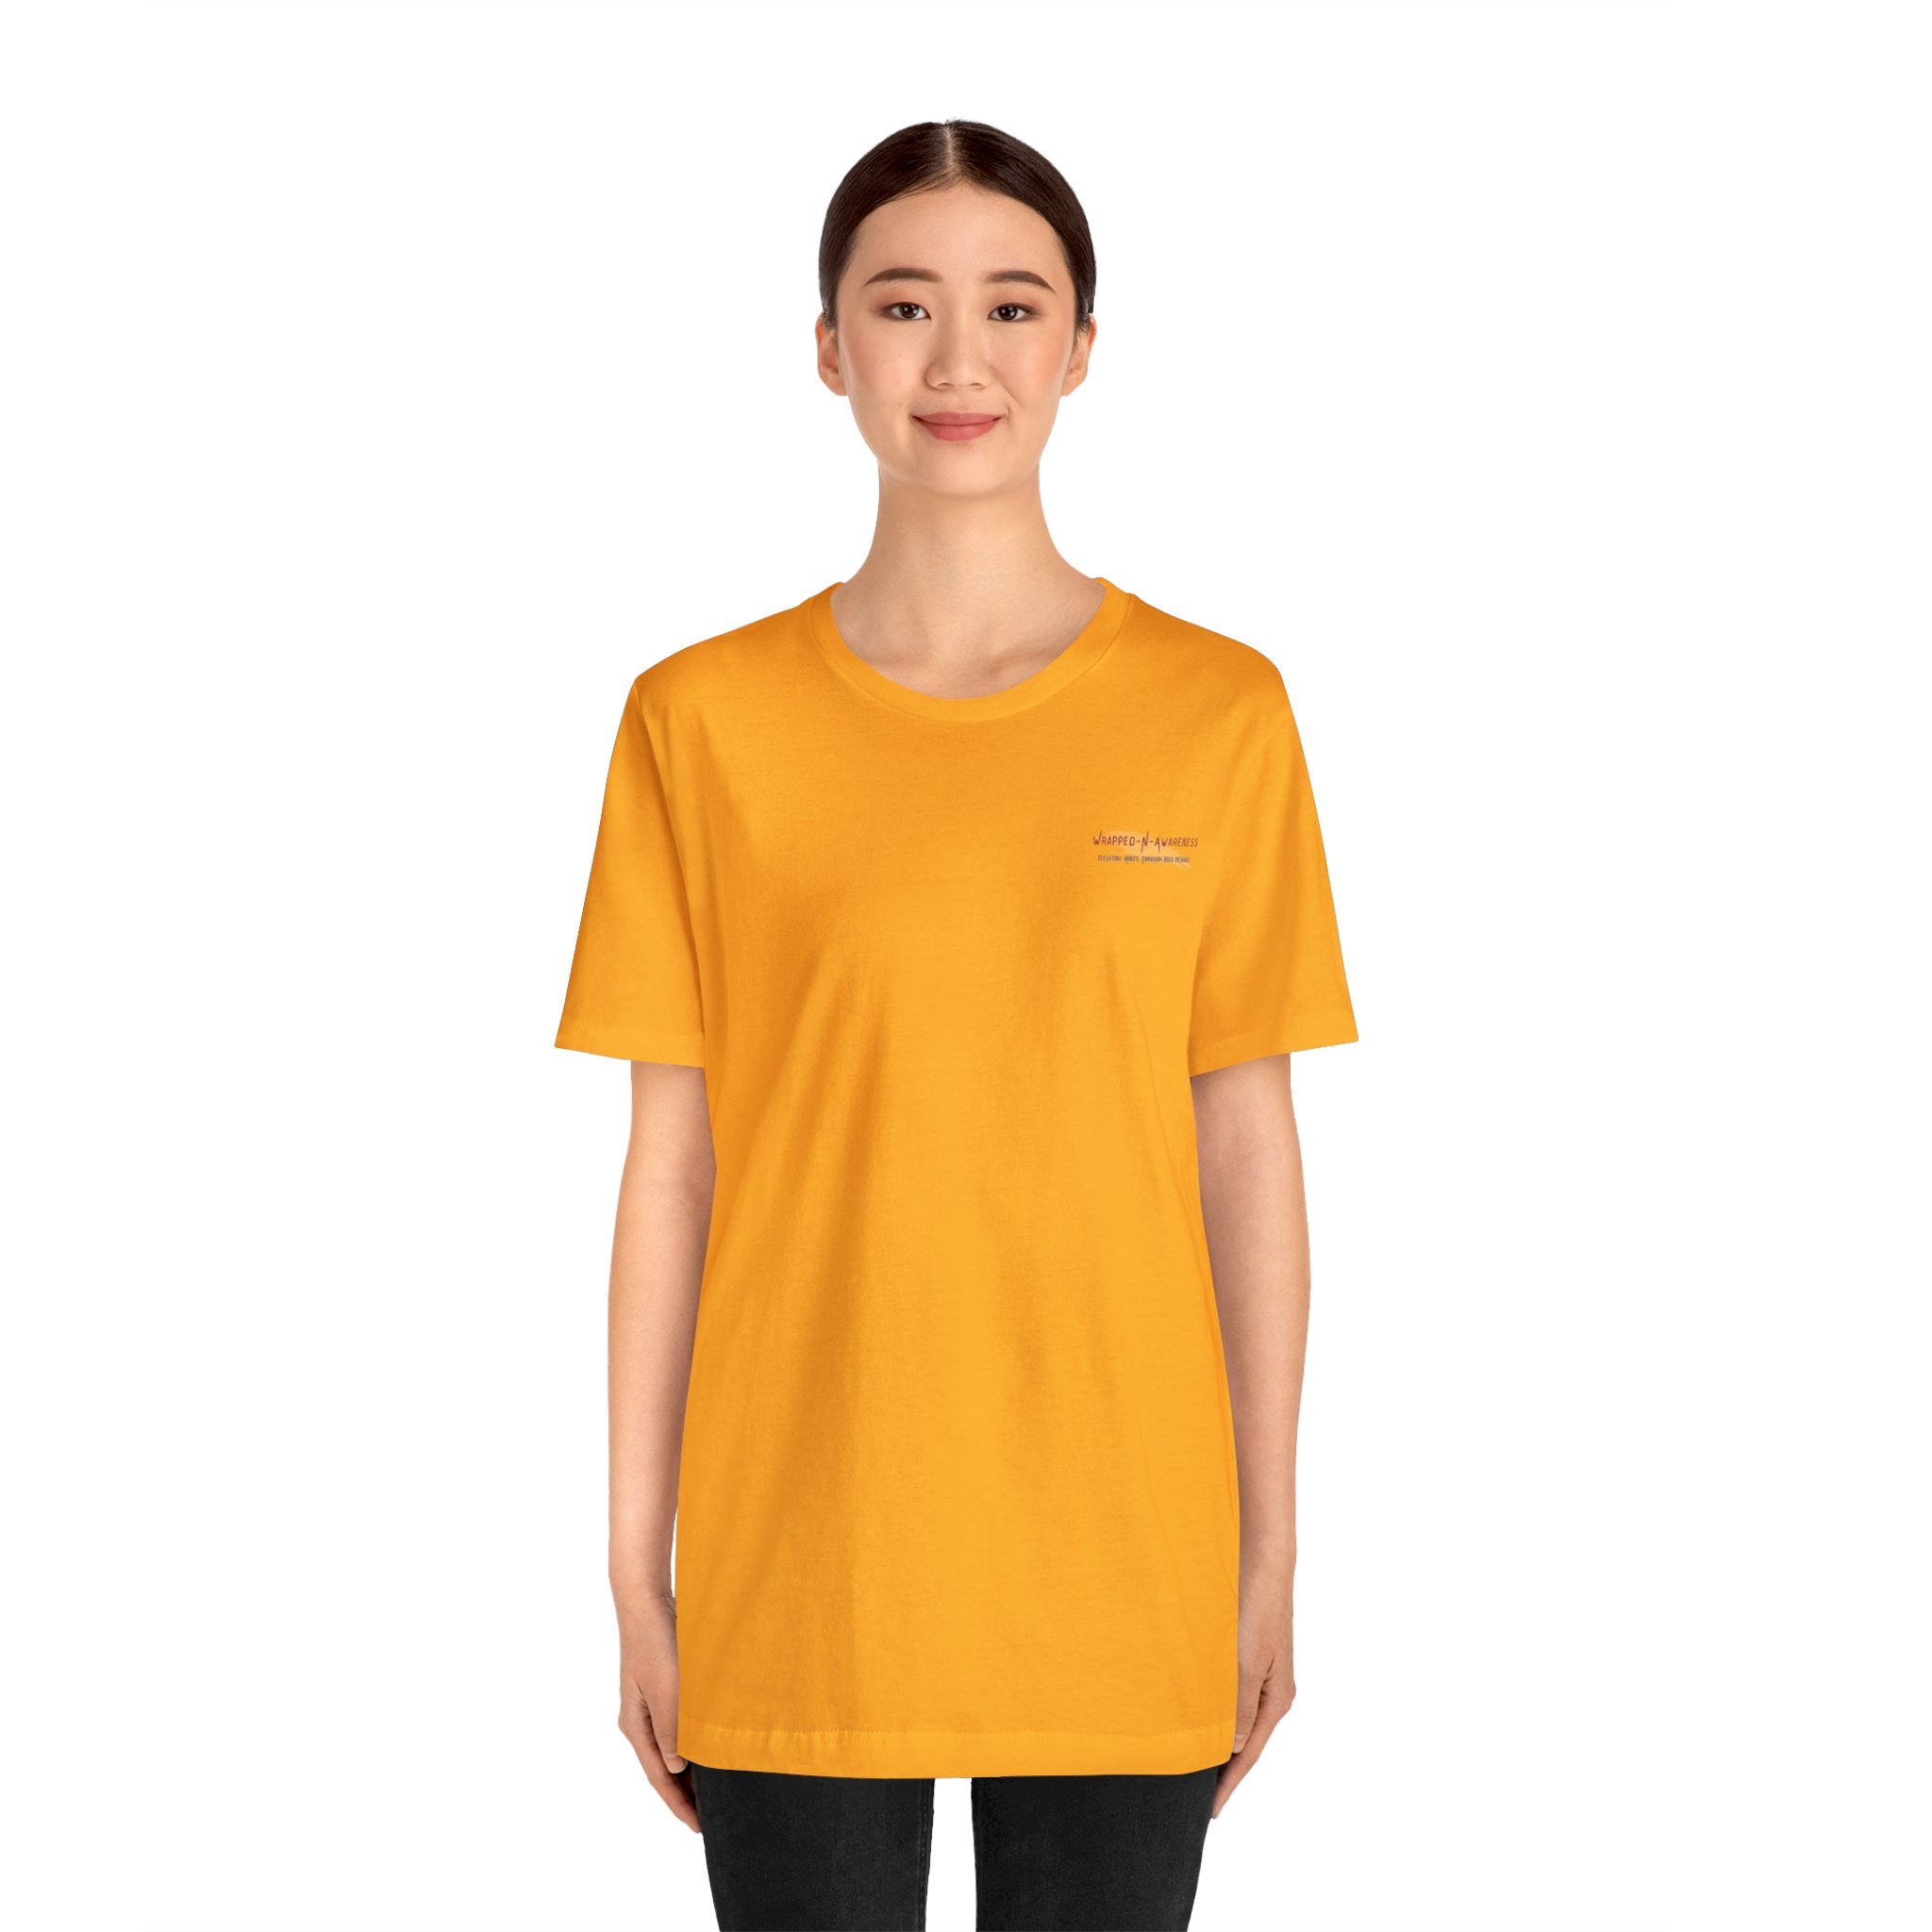 Progress Over Perfection Tee - Bella+Canvas 3001 Yellow Airlume Cotton Bella+Canvas 3001 Crew Neckline Jersey Short Sleeve Lightweight Fabric Mental Health Support Retail Fit Tear-away Label Tee Unisex Tee T-Shirt 13363740237236613555_2048 Printify